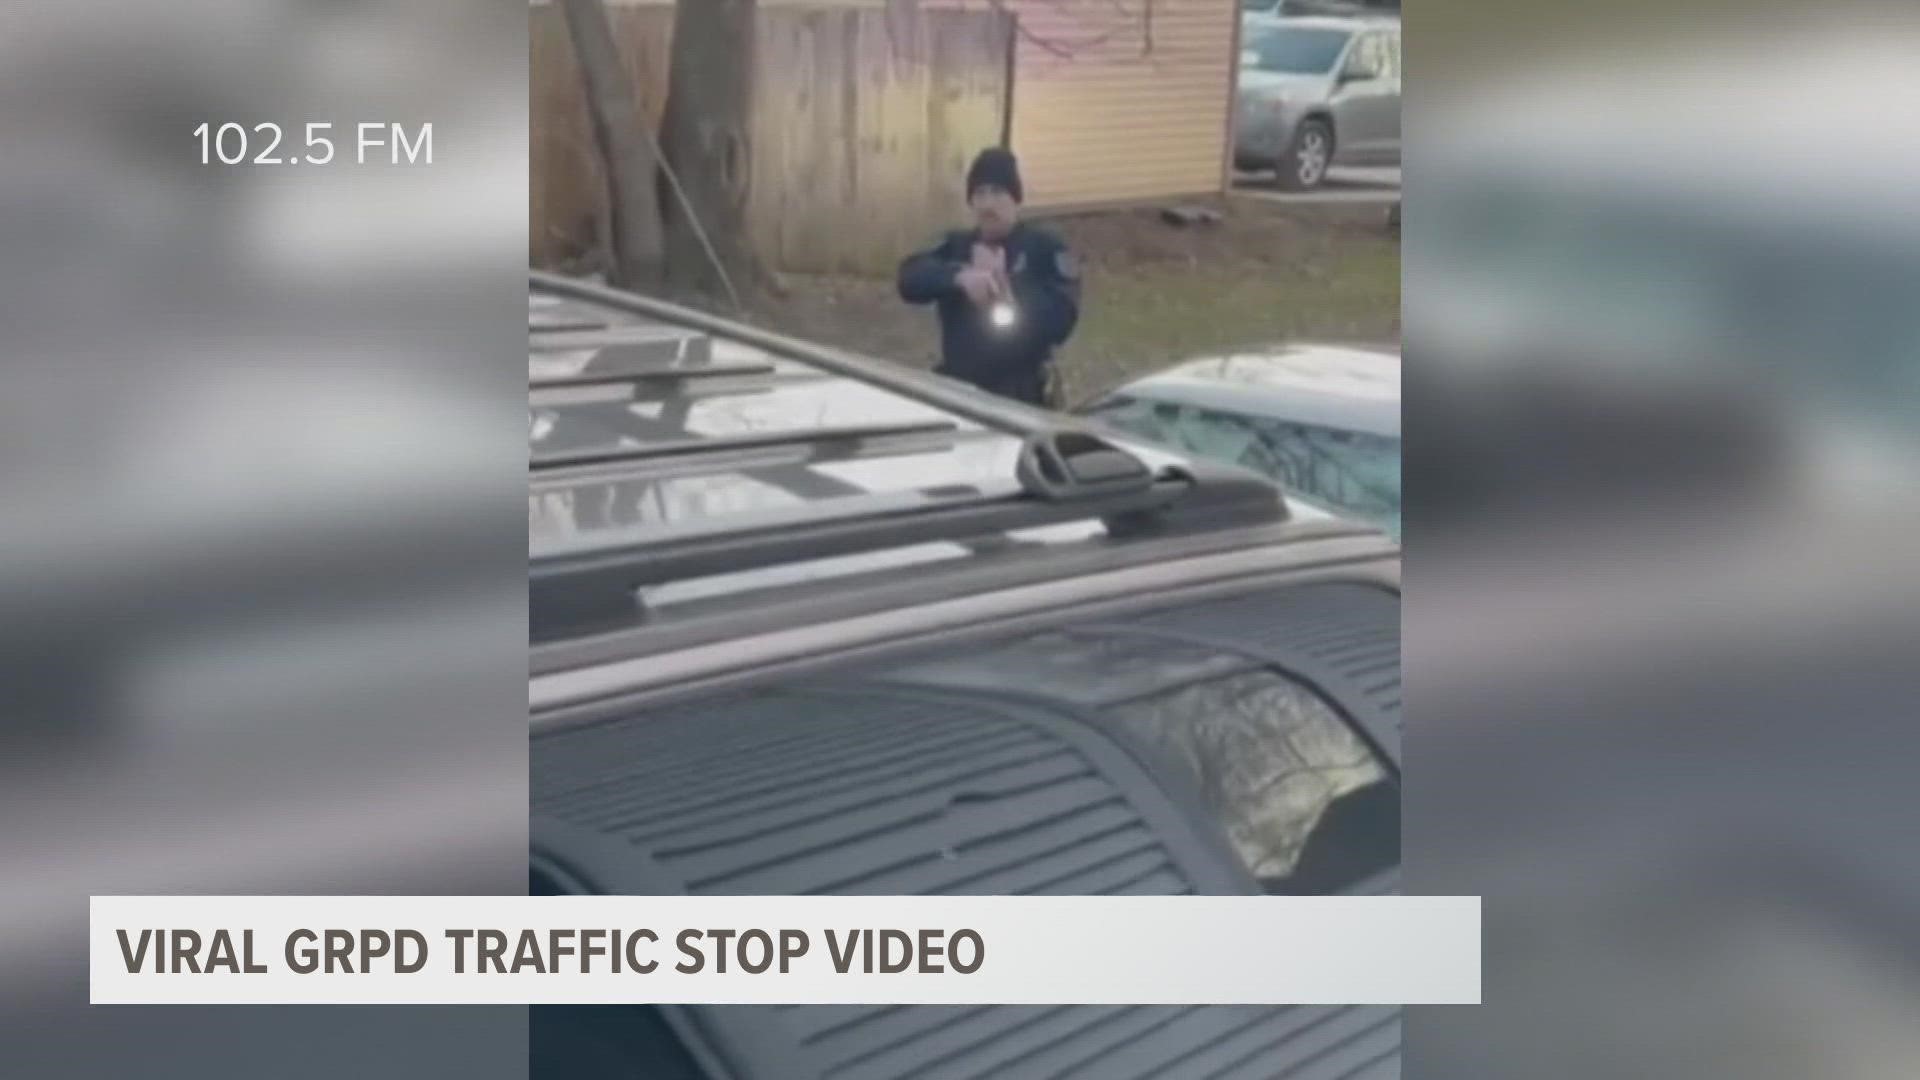 The immediate aftermath of a traffic stop in Grand Rapids is making rounds on social media. The video, taken last Friday, shows officers with guns drawn.